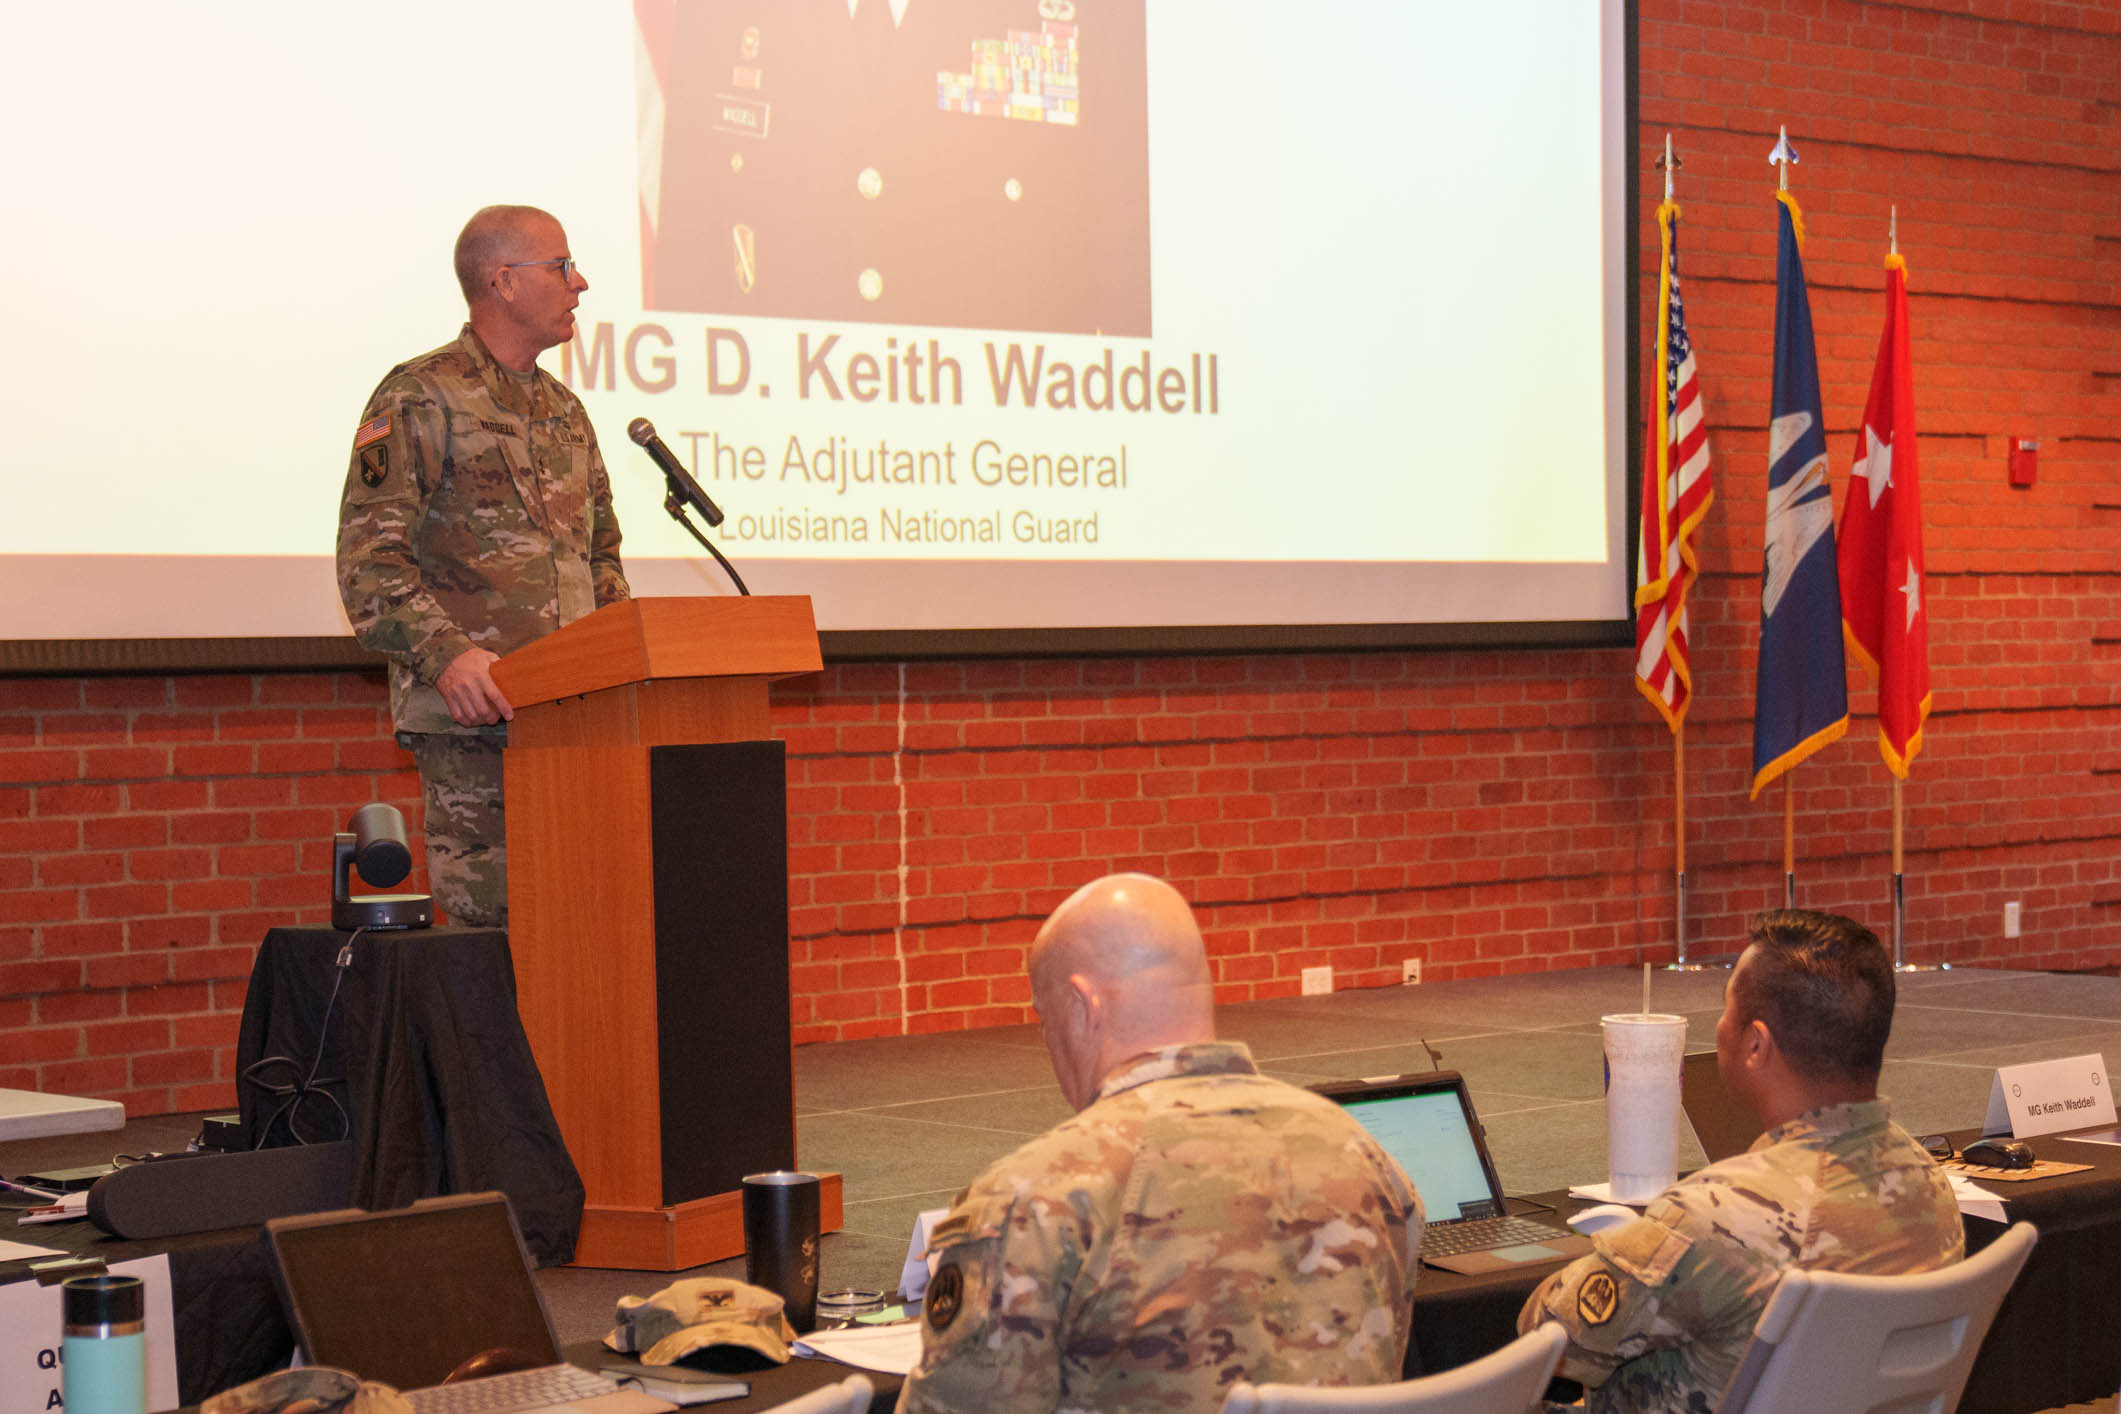 Maj. Gen. D. Keith Waddell, the adjutant general of the Louisiana National Guard, gives his opening remarks at the All-Hazards Coordination Workshop at Jackson Barracks in New Orleans, March 15, 2022. The workshop is designed to improve the ability of attending states’ and territories’ National Guards to support their governors and citizens through coordinated aid agreements in the event of a major disaster between 2022-2023. (U.S. Army National Guard photo by Staff Sgt. Josiah Pugh)